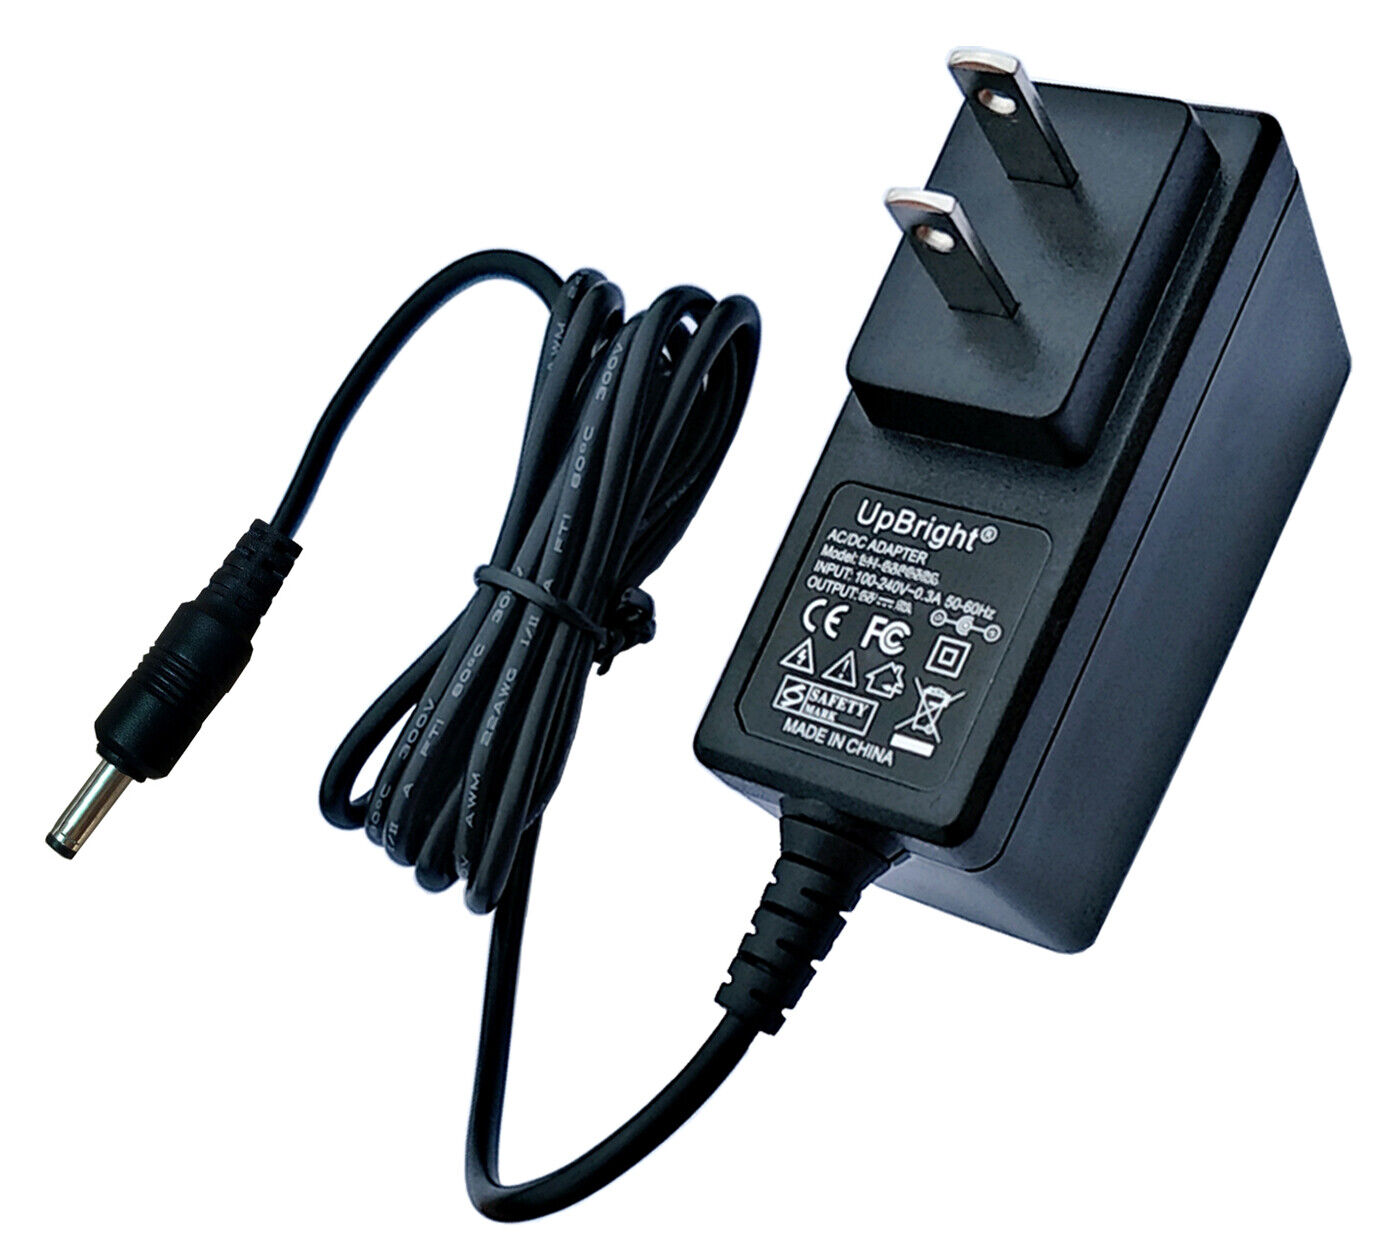 5V 3A AC Adapter For IK Multimedia iRig Pro I/O Audio Interface DC Power Supply